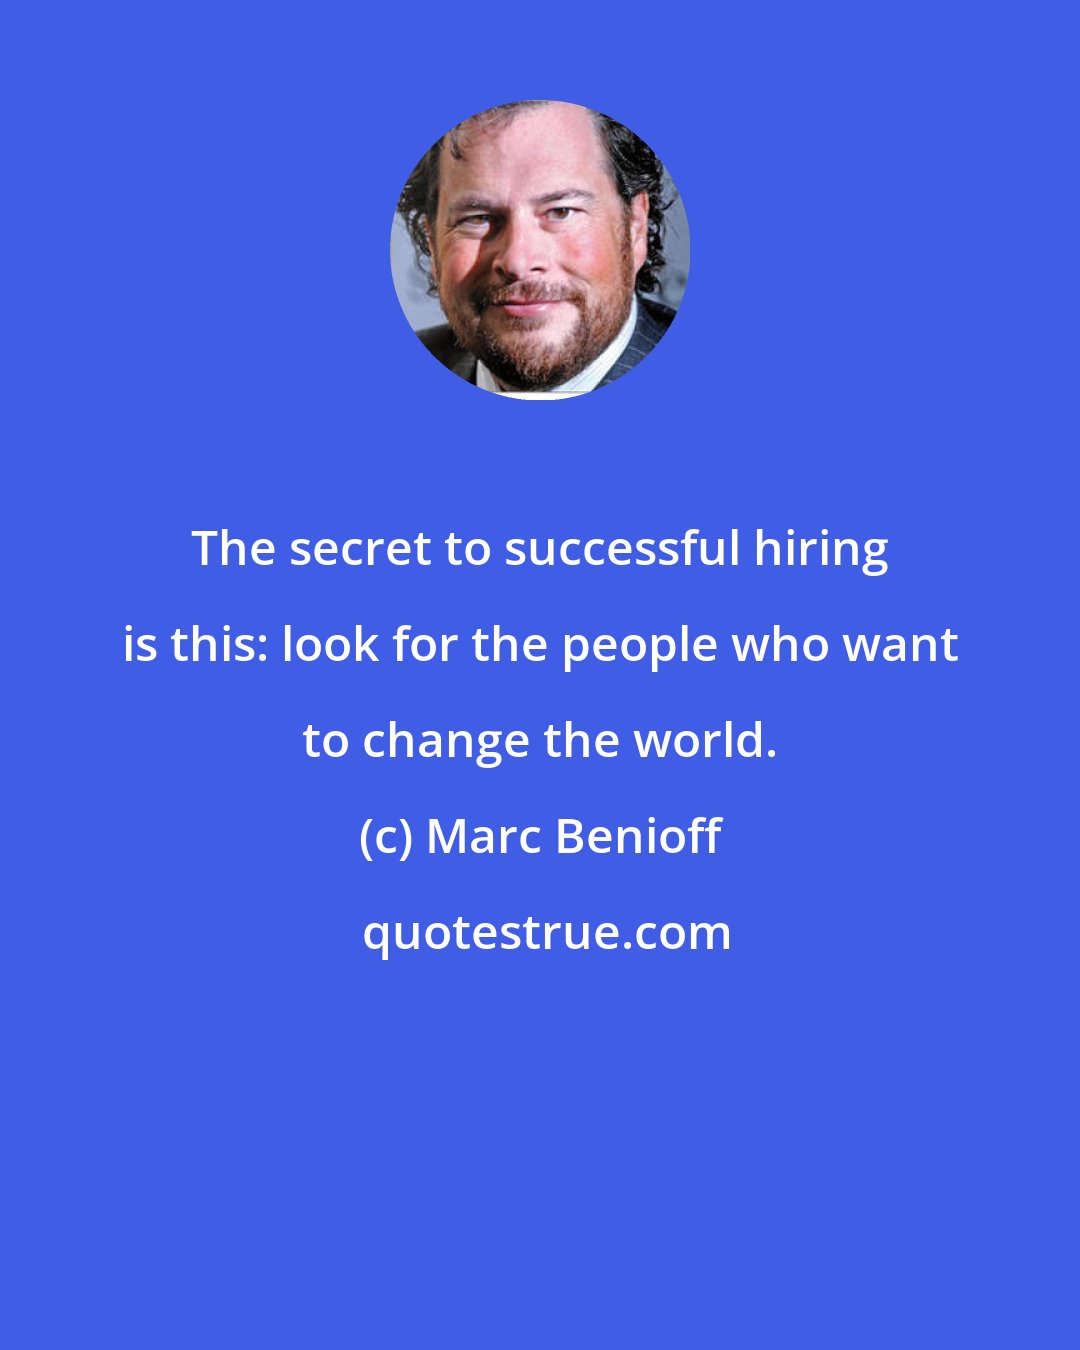 Marc Benioff: The secret to successful hiring is this: look for the people who want to change the world.